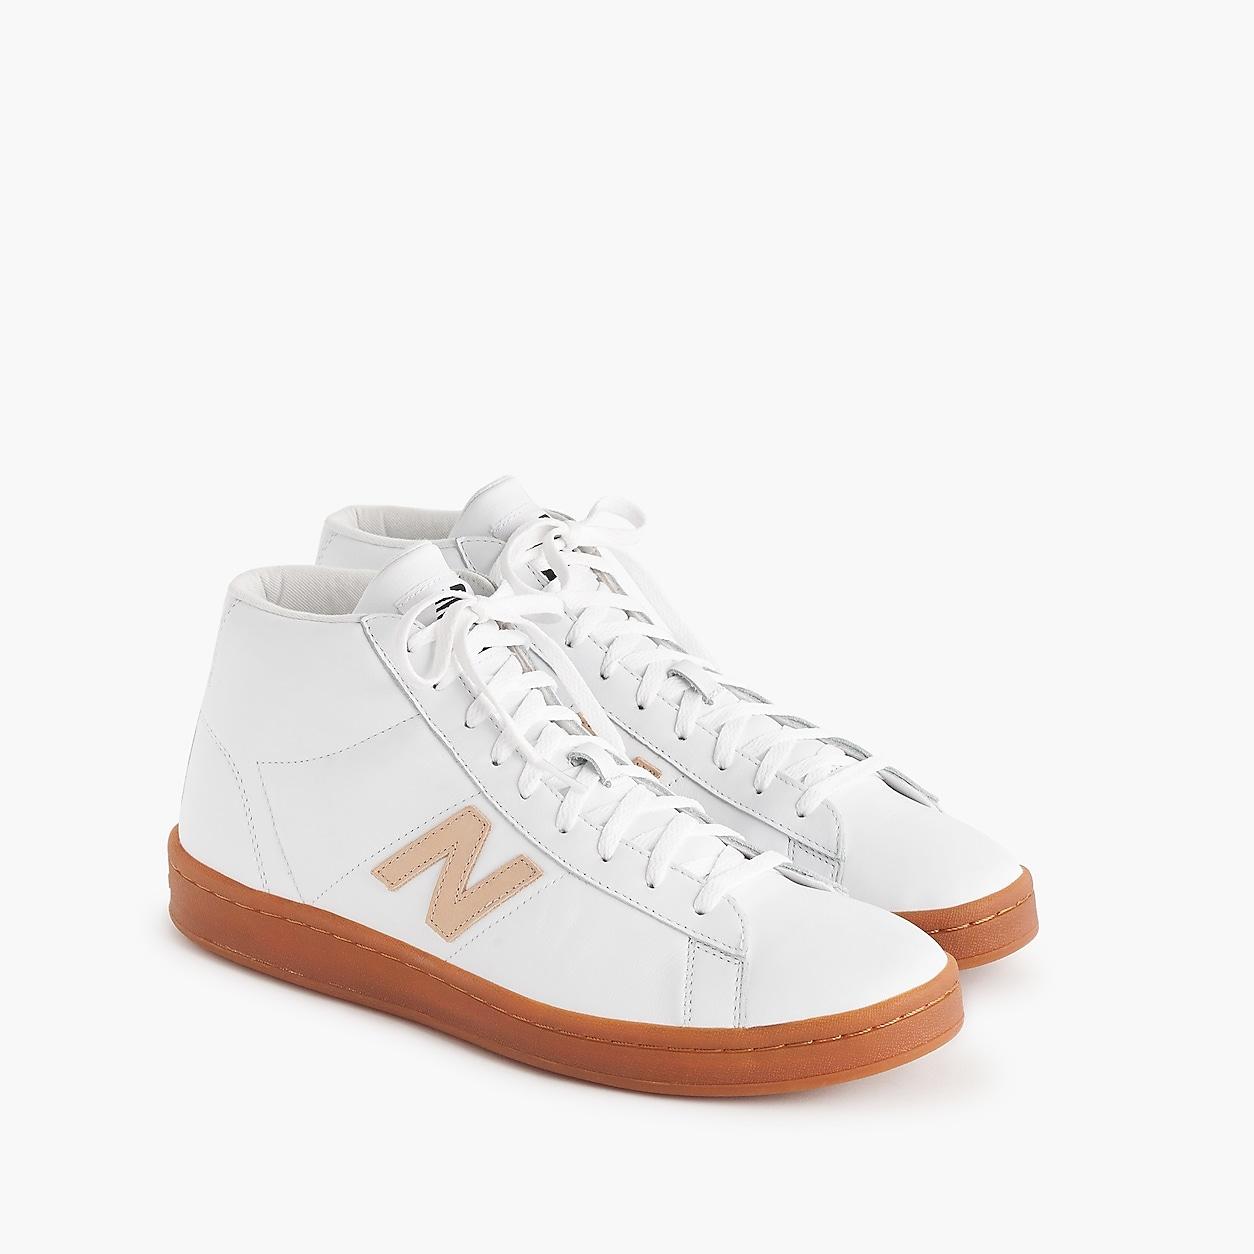 J.Crew 891 leather high-top sneakers 